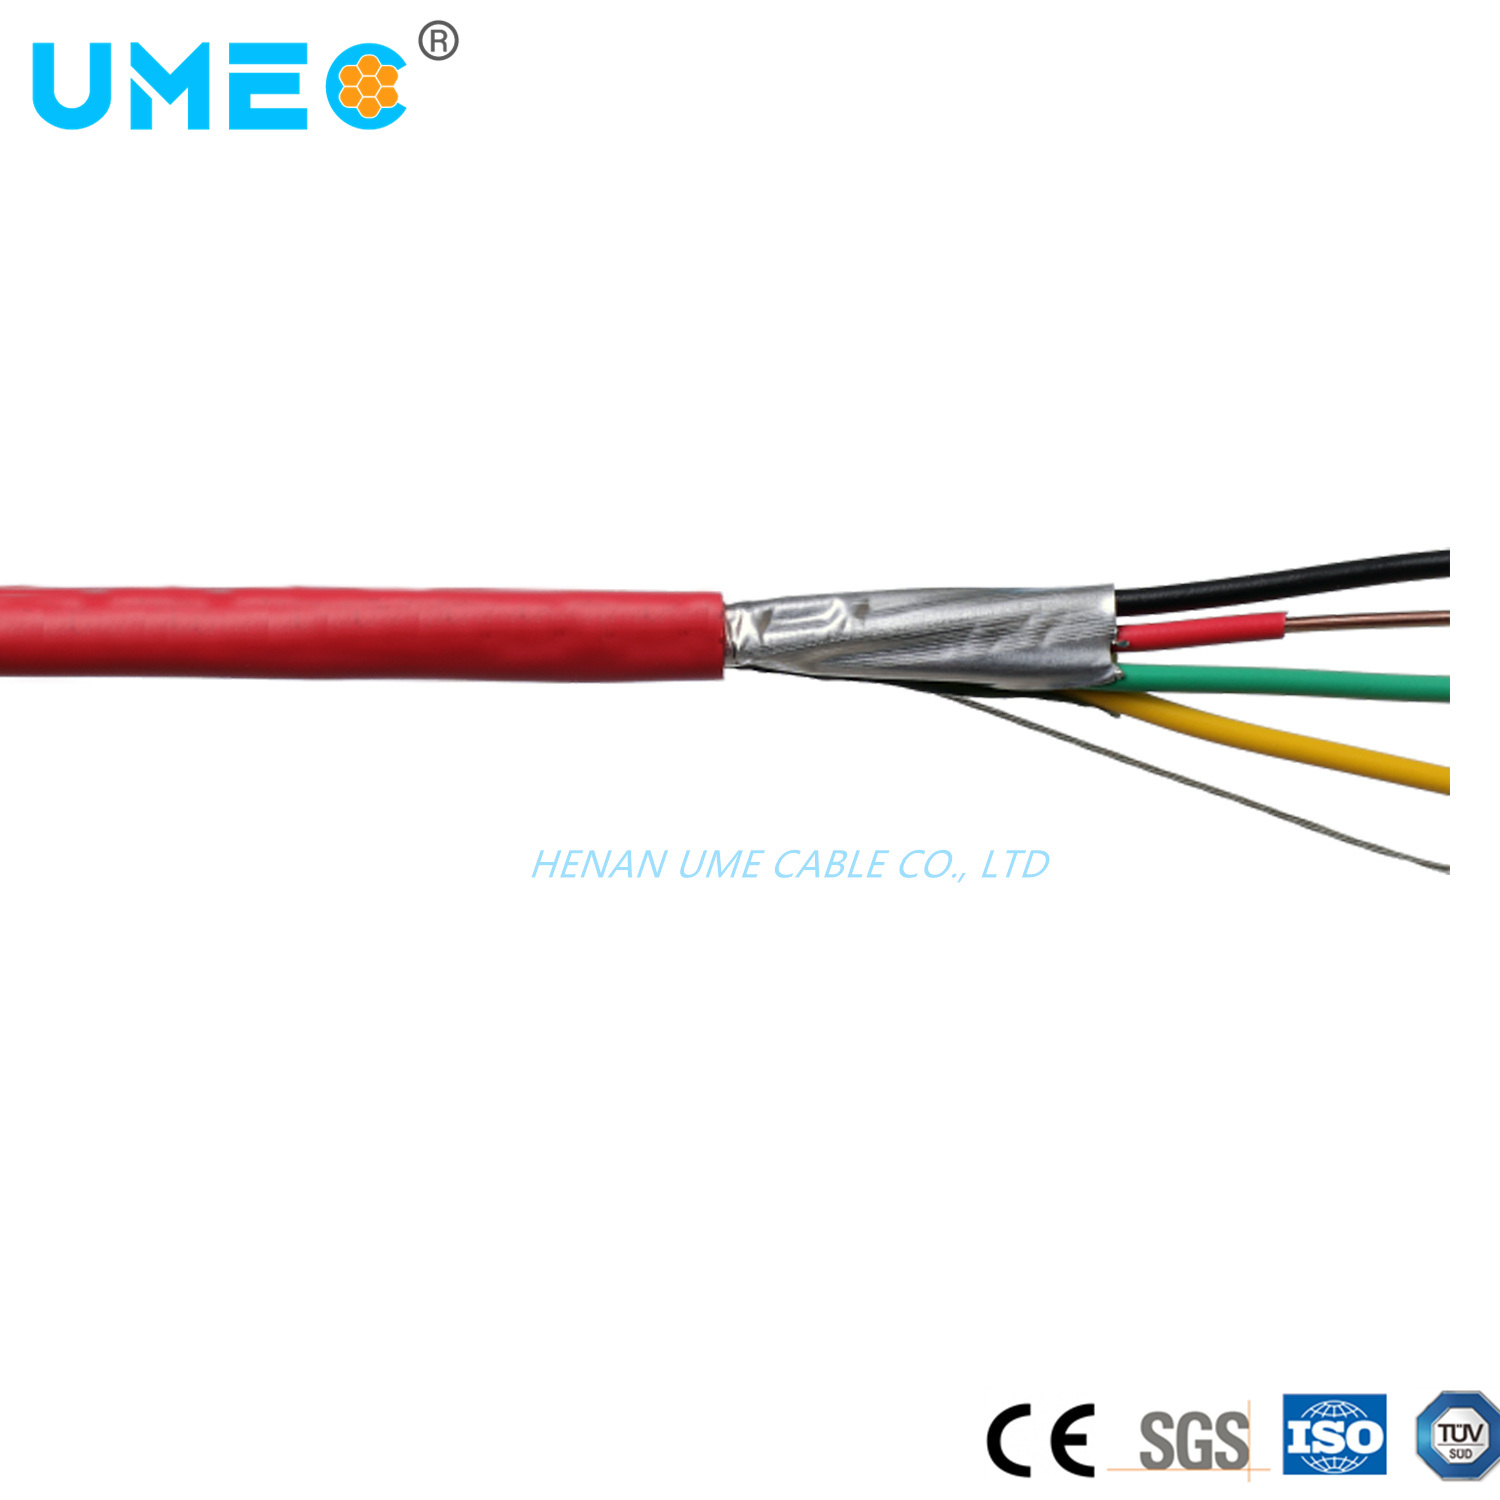 Fire Resistance Cable Spcial Cable